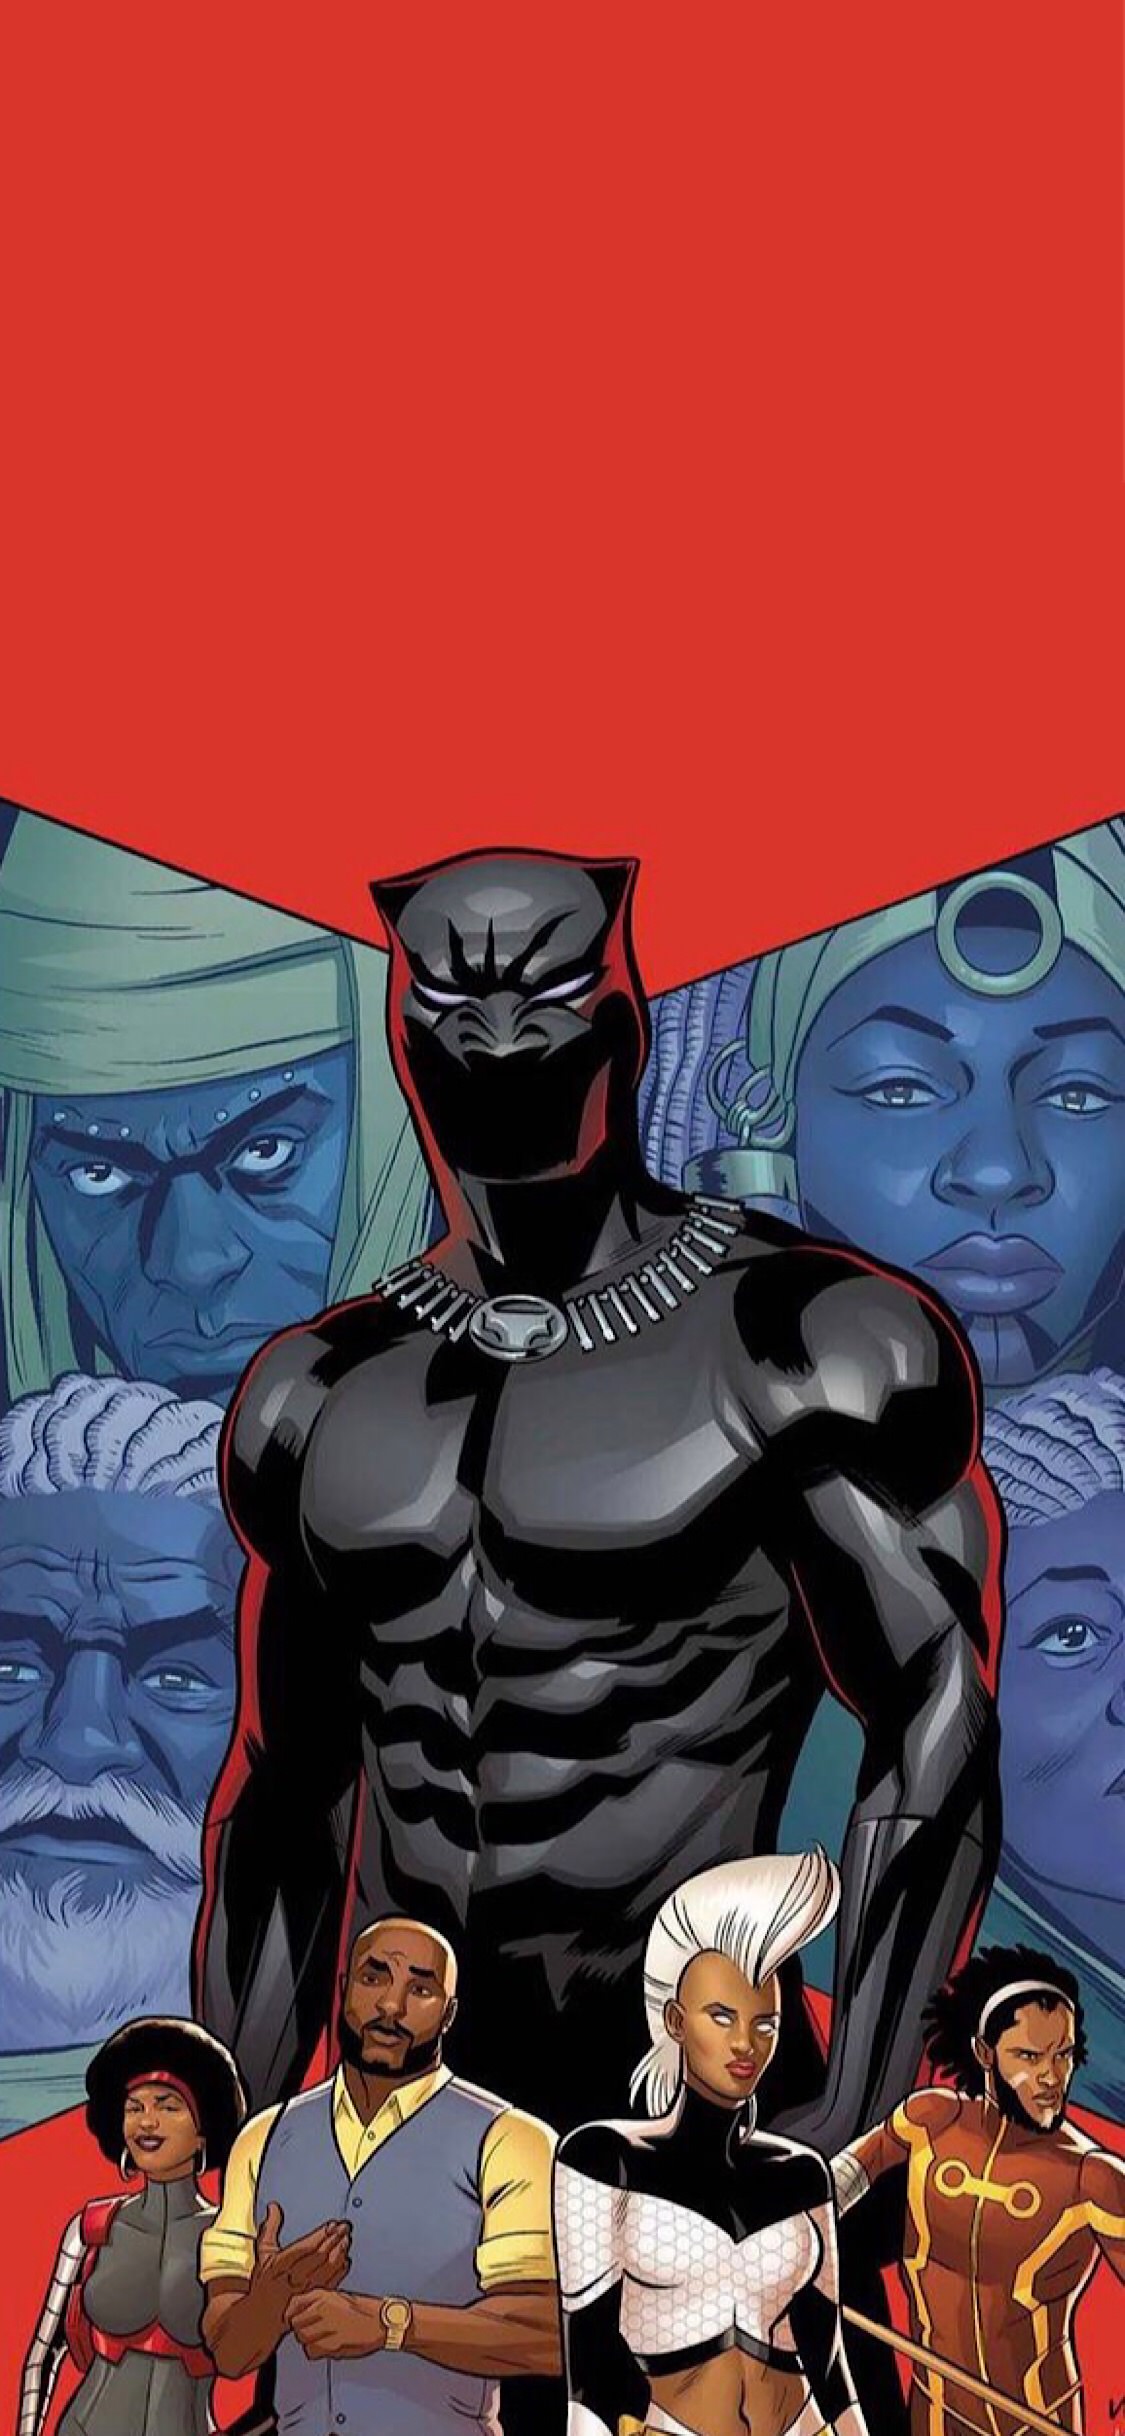 10 Black Panther Wallpapers - Marvel Comic Iphone X , HD Wallpaper & Backgrounds